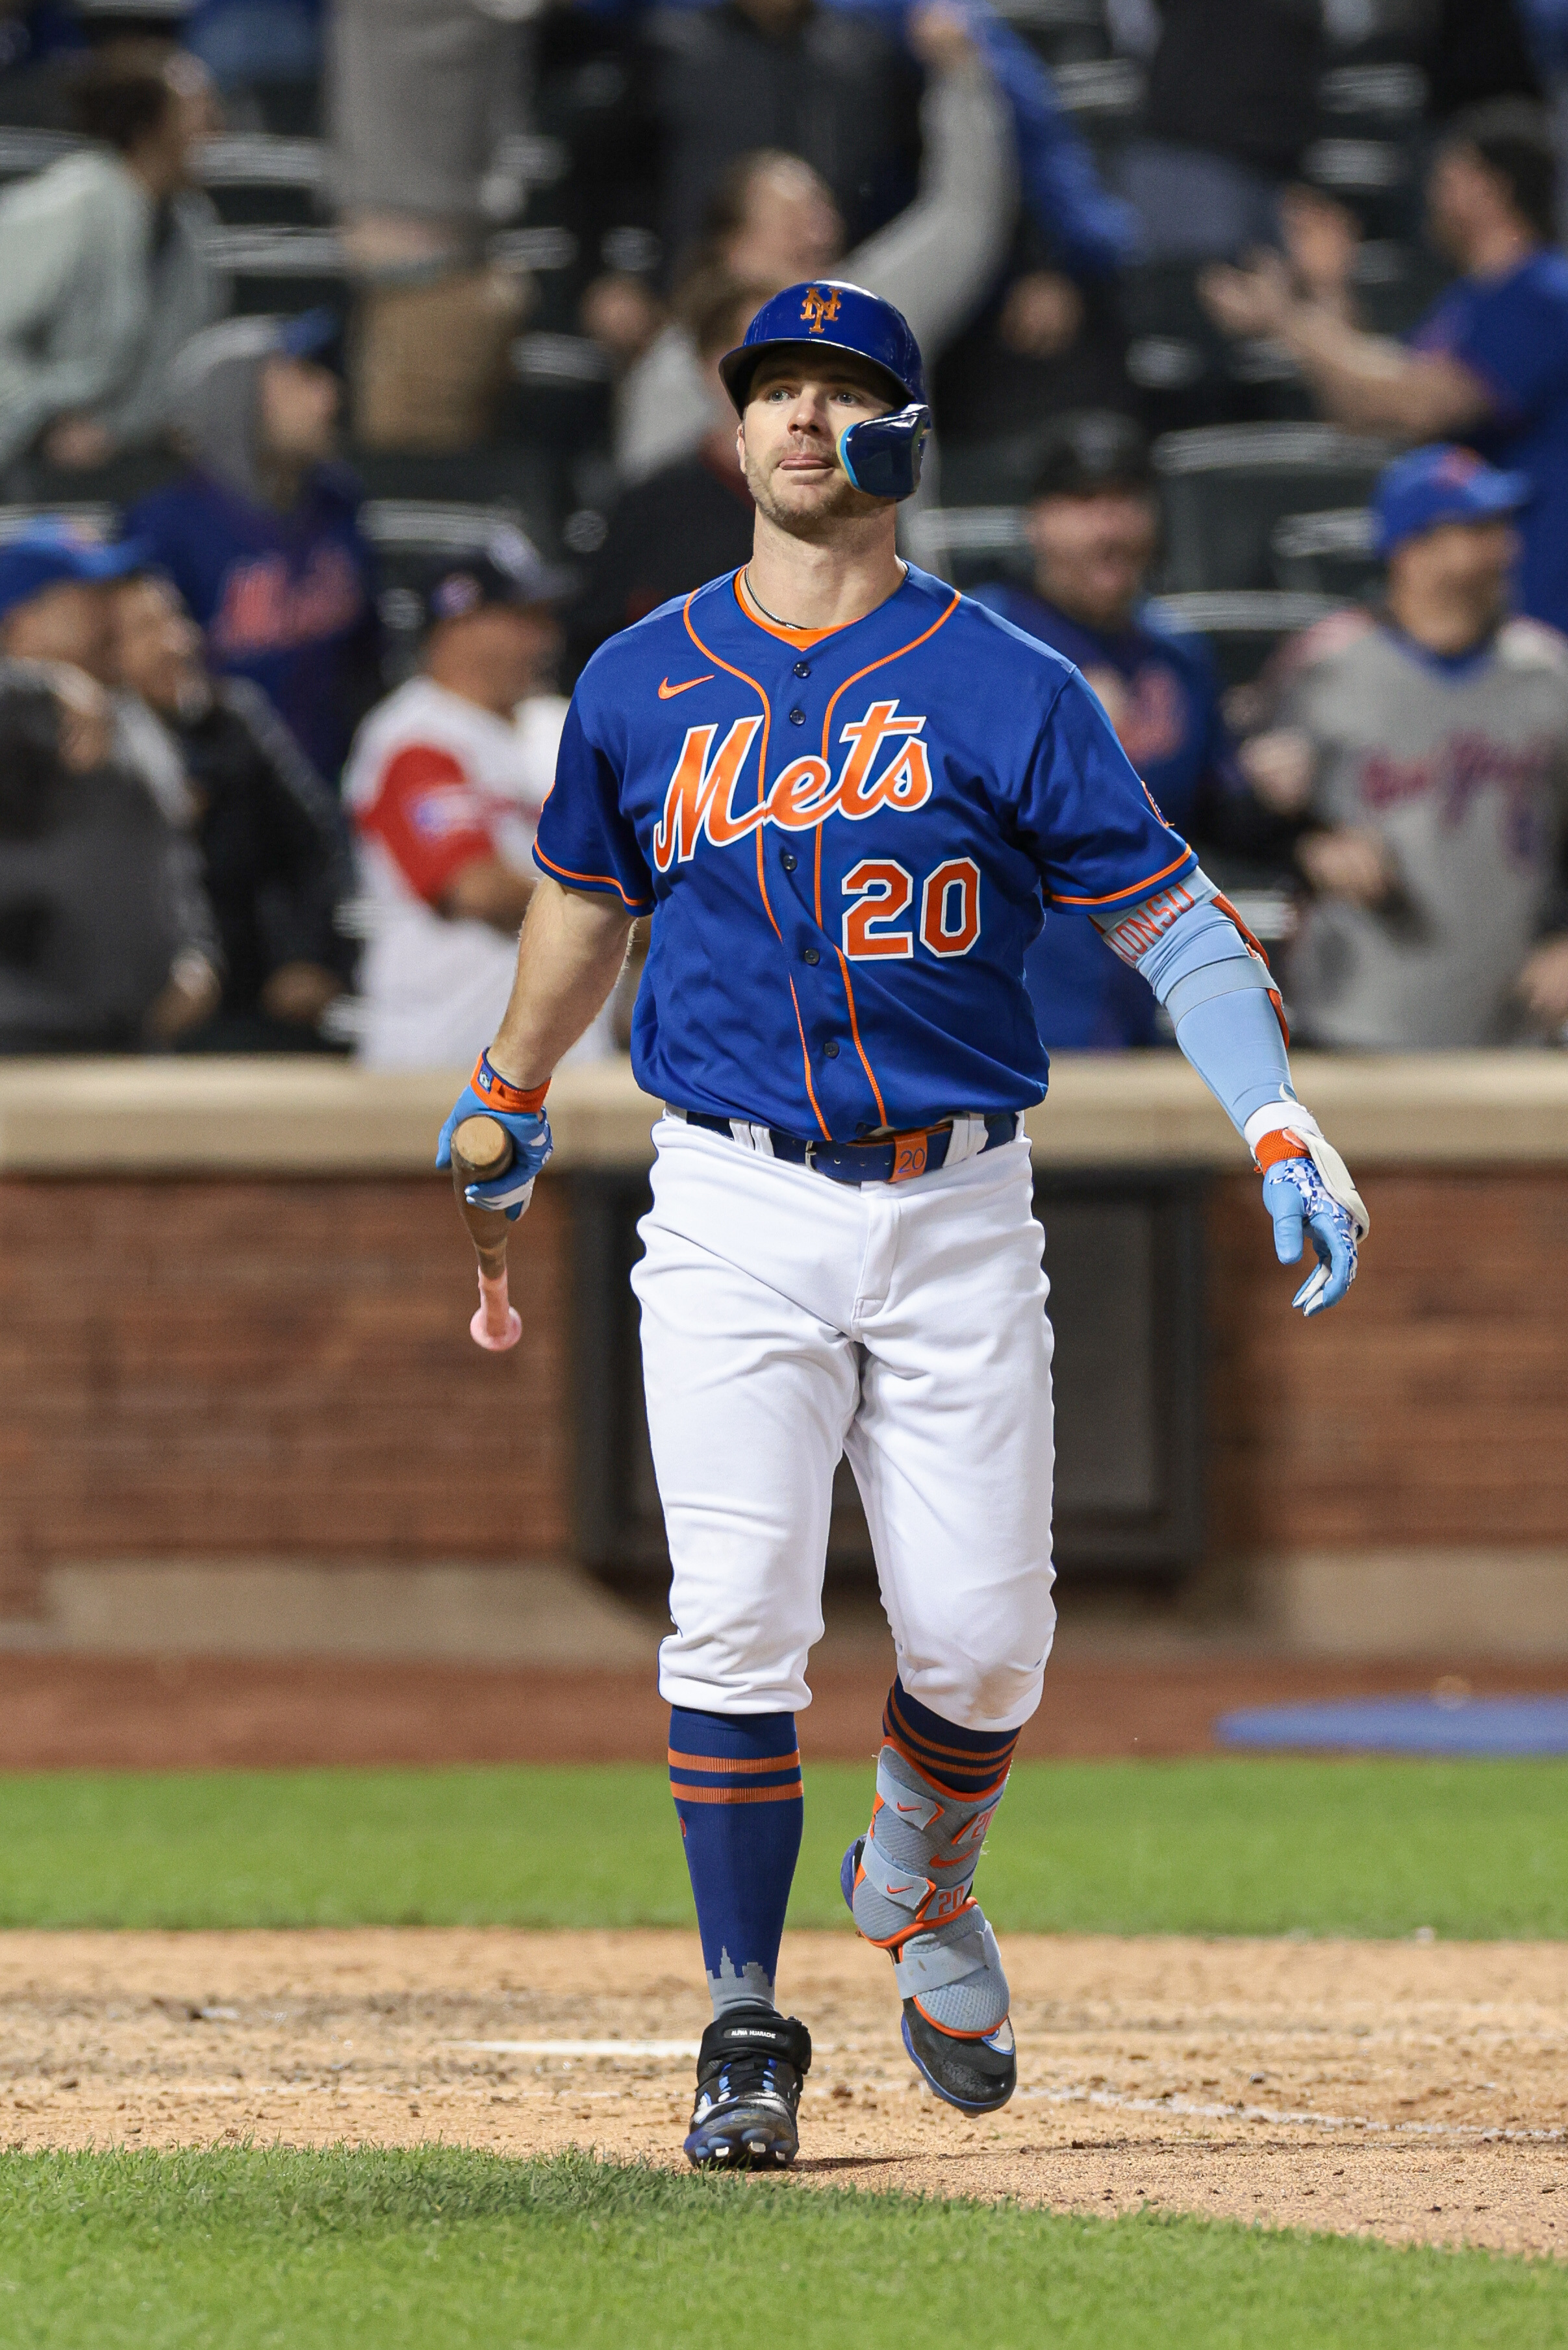 Mets' Pete Alonso excited for homecoming series vs. Rays